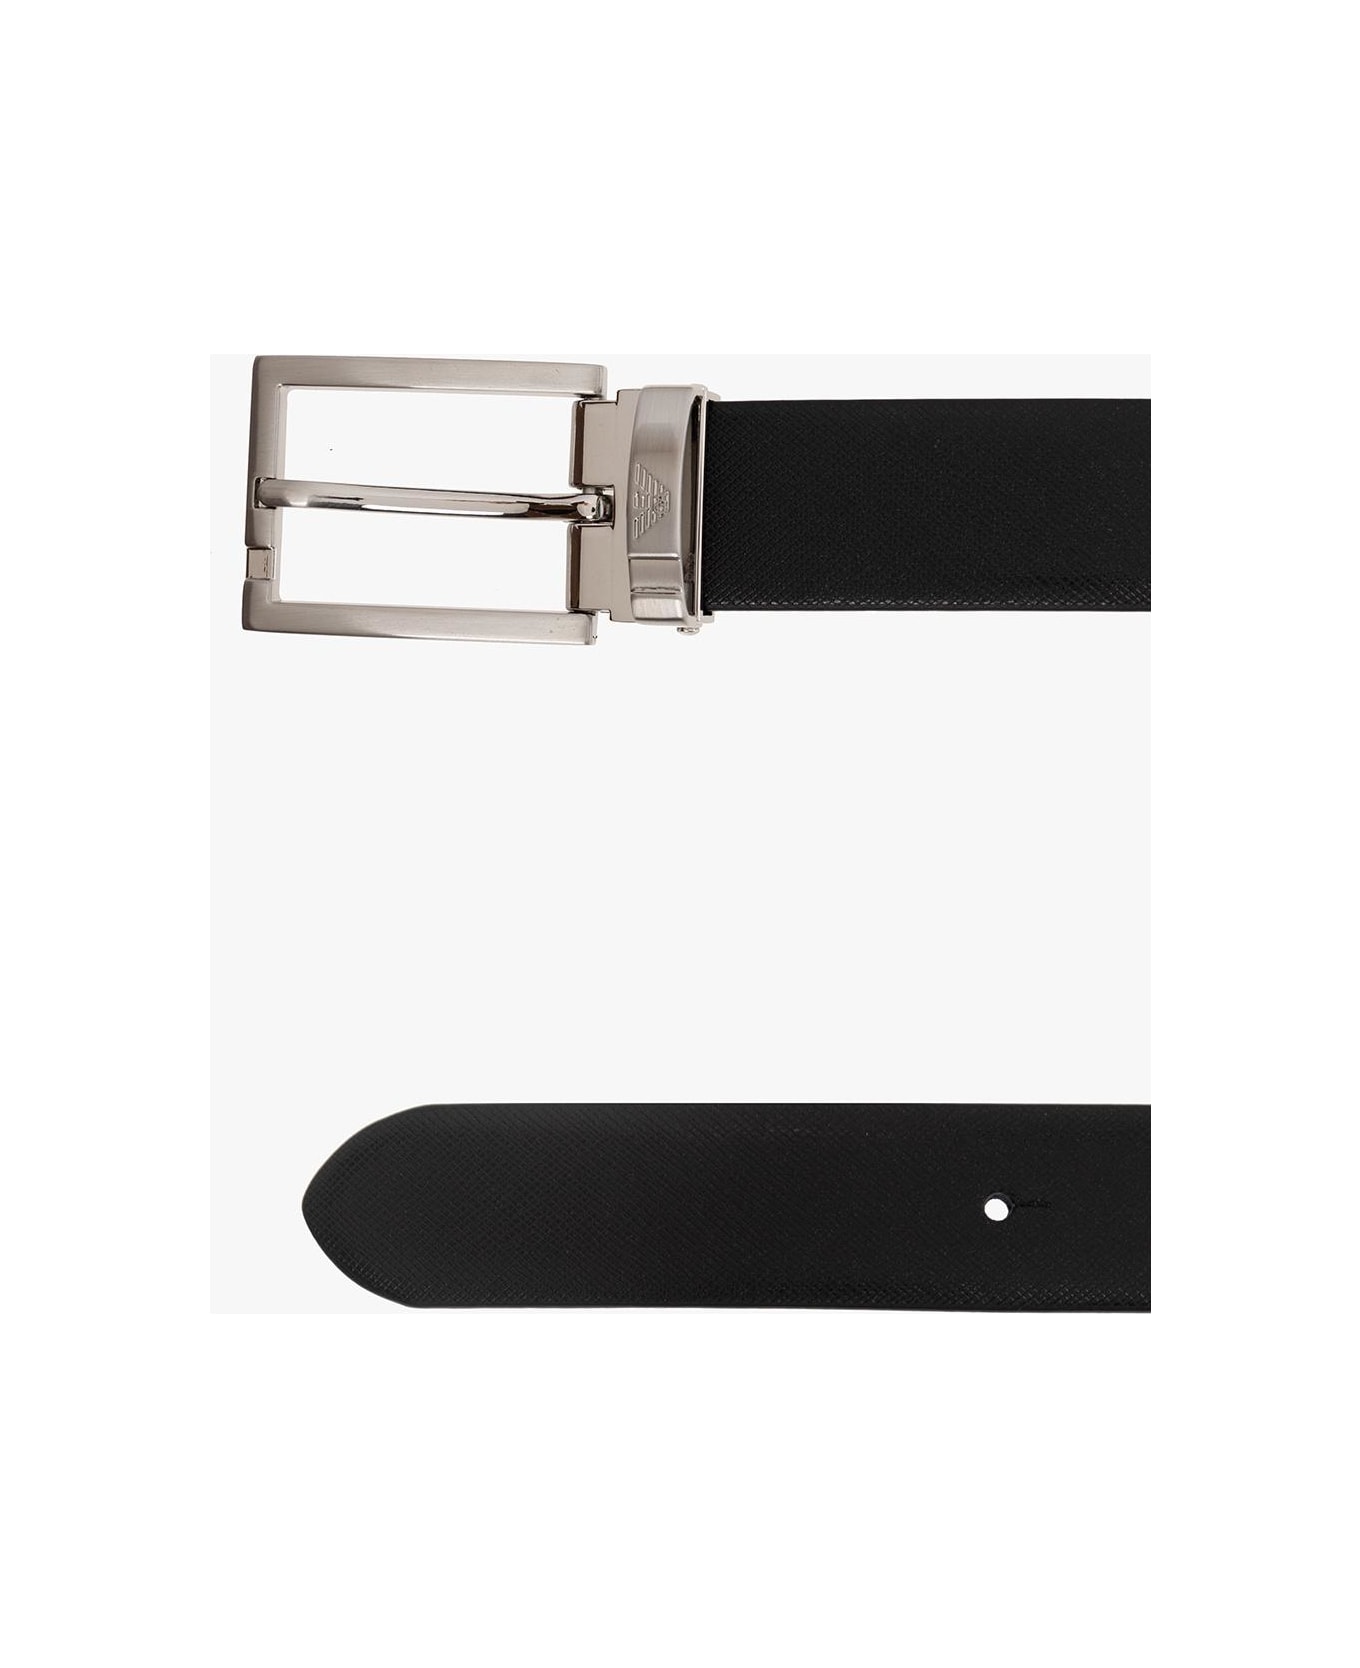 Giorgio Armani Reversible Belt With Interchangeable Buckles - Black/Blue